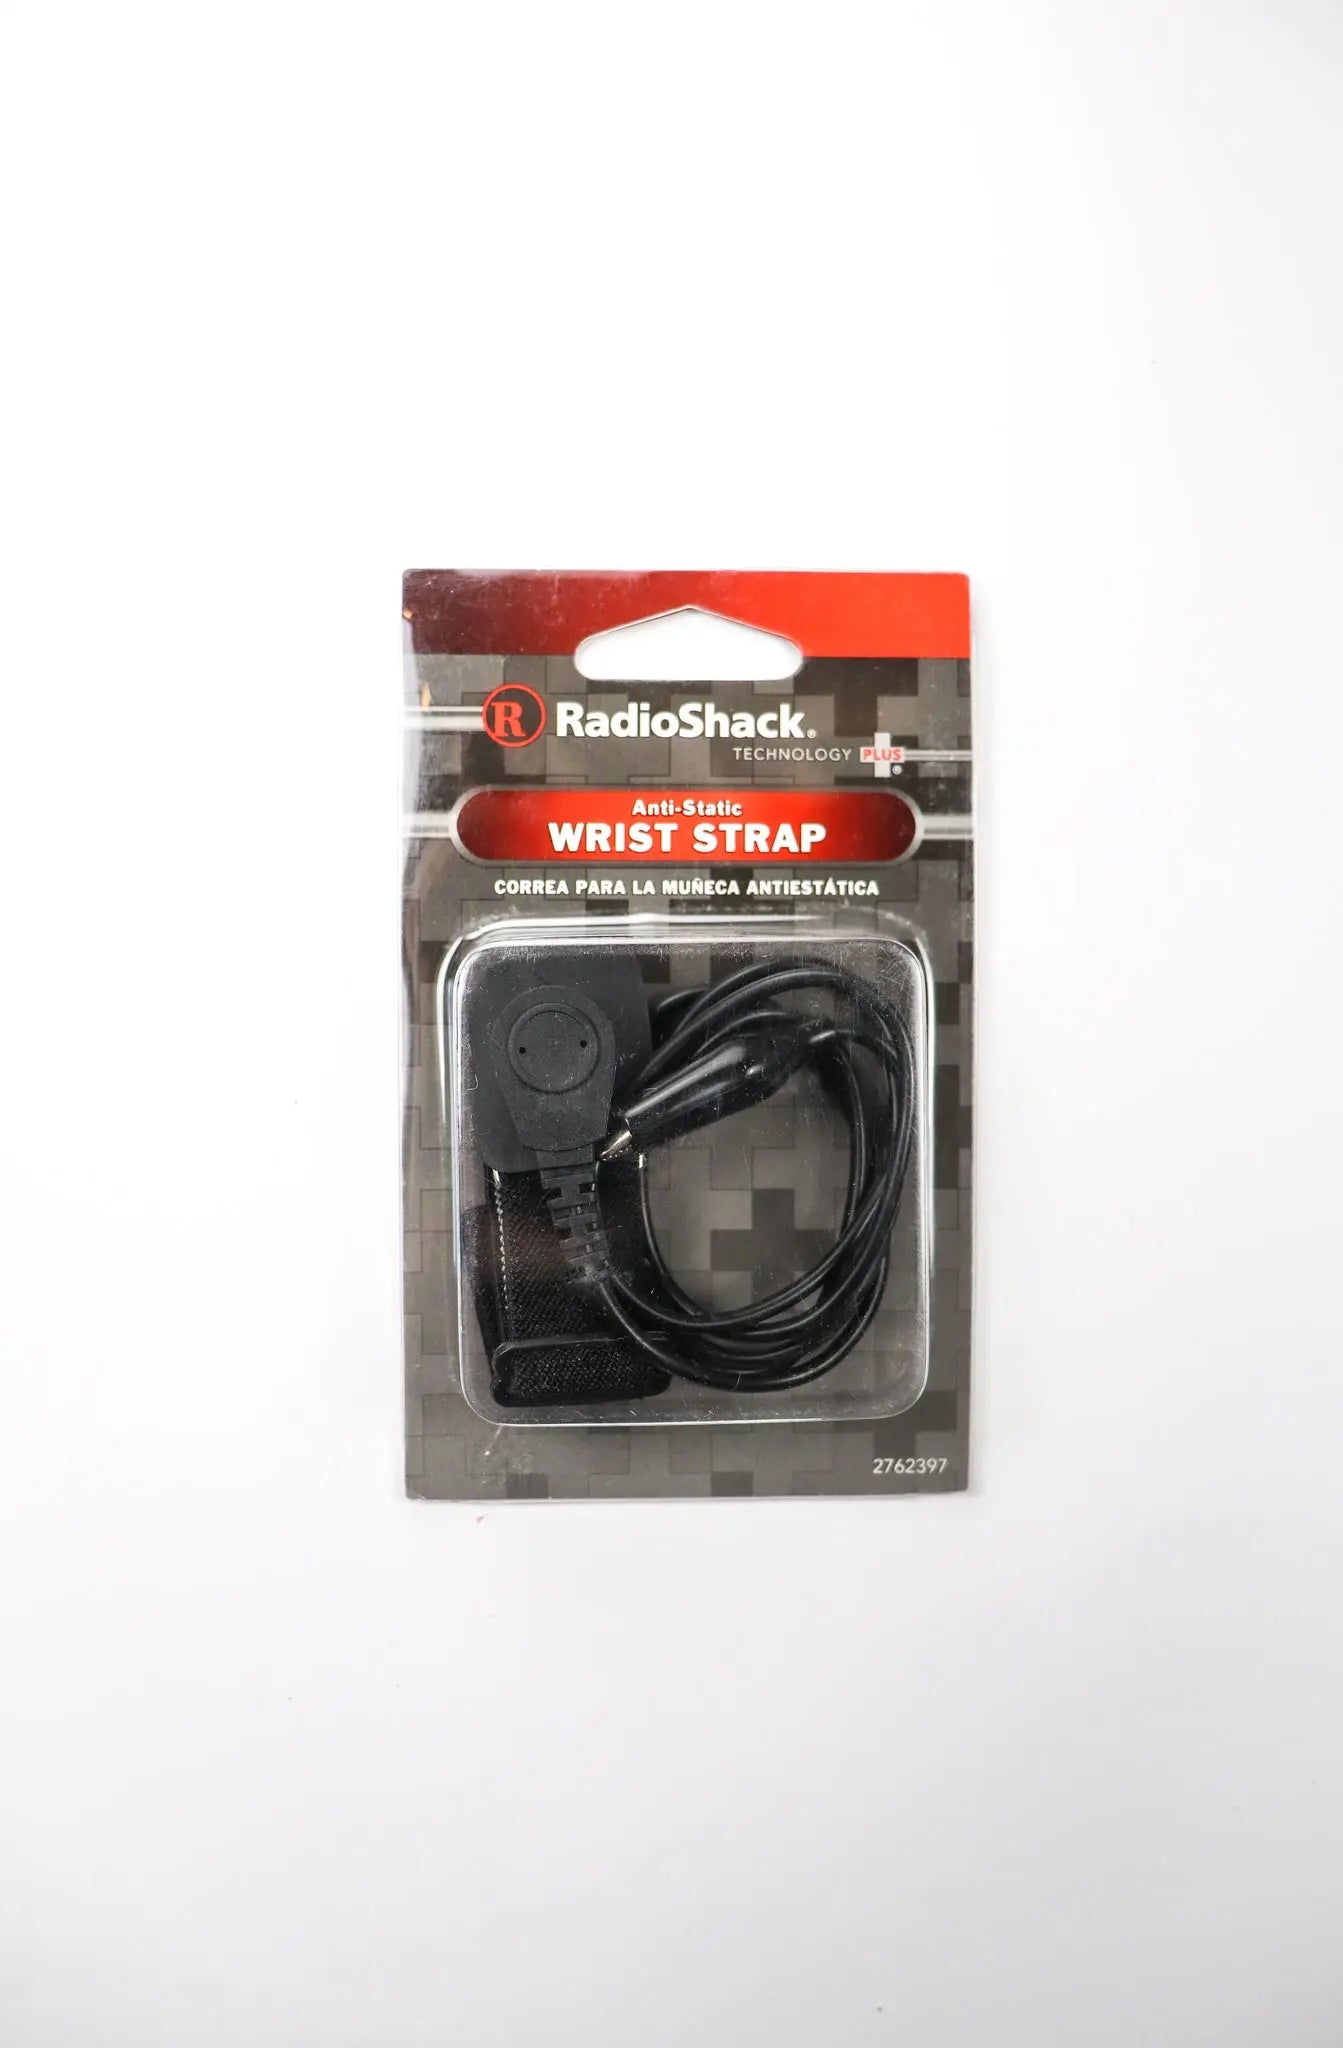 Antistatic Wrist Strap - THE STEMCELL SCIENCE SHOP